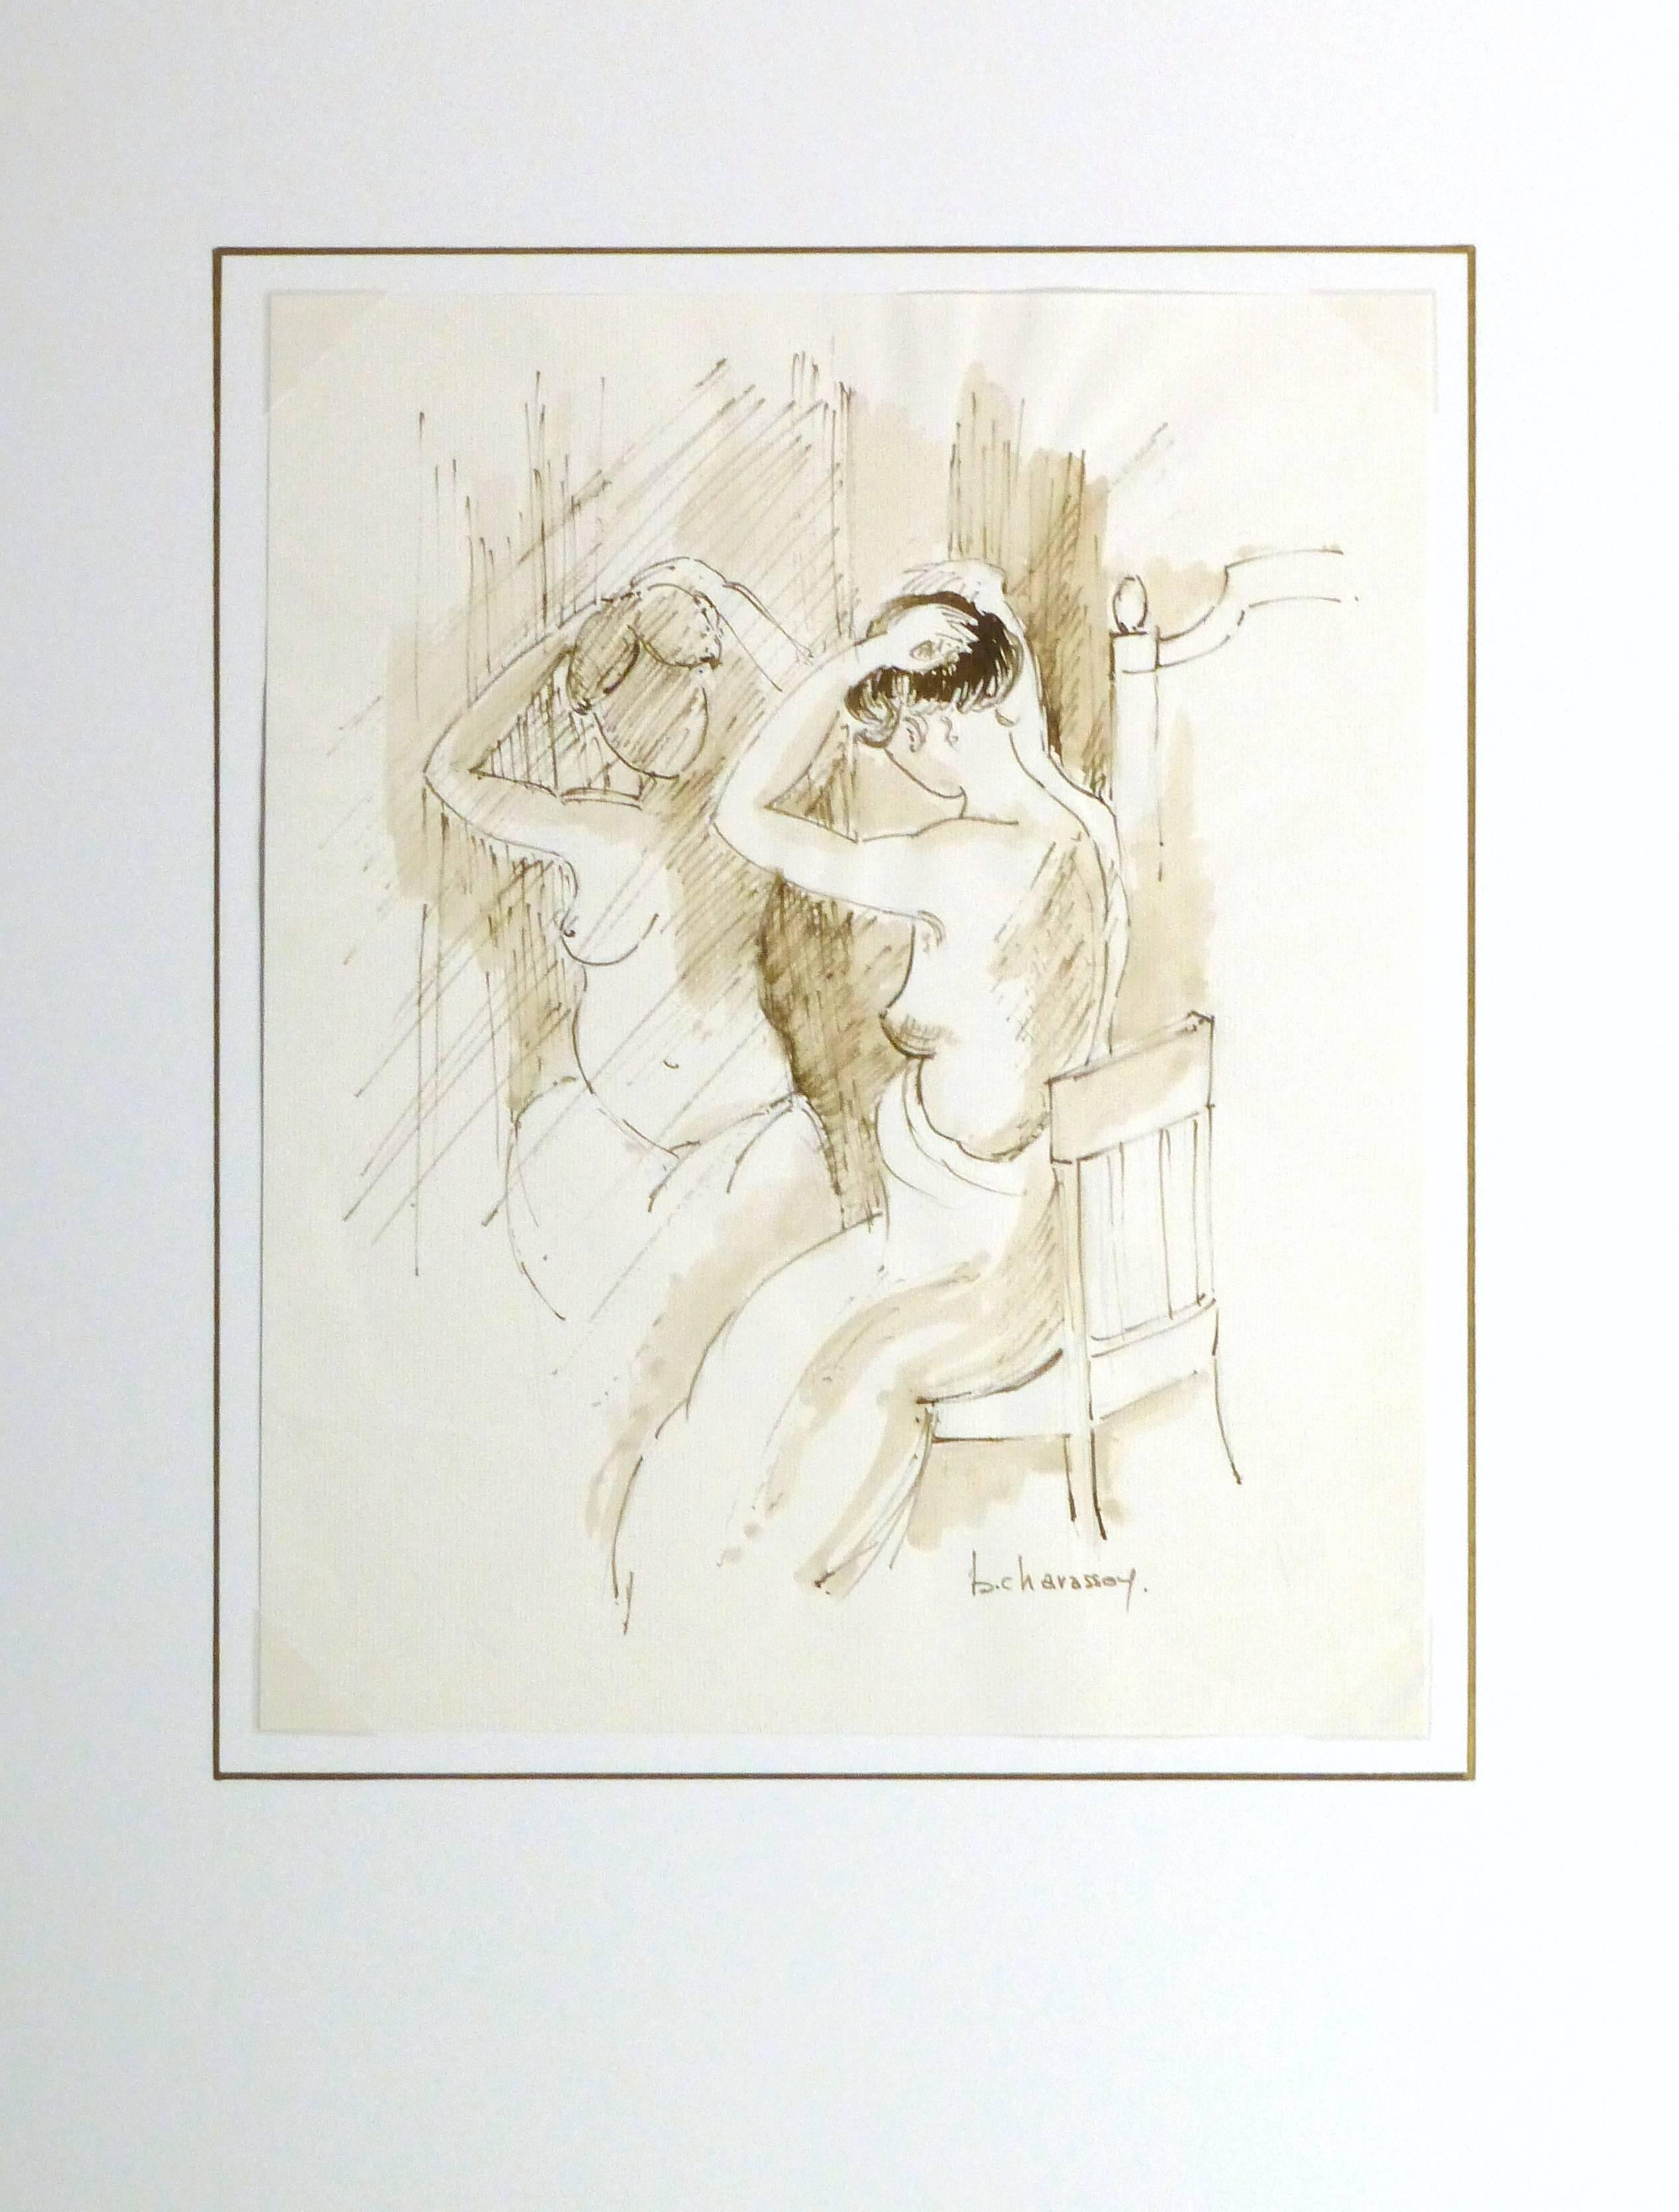 Light hearted French ink painting of a partially nude young female arranging her hair in front of a mirror by B. Charasson, 1980s. Signiert unten rechts.

Original artwork on paper displayed on a white mat with a gold border. Archival plastic sleeve